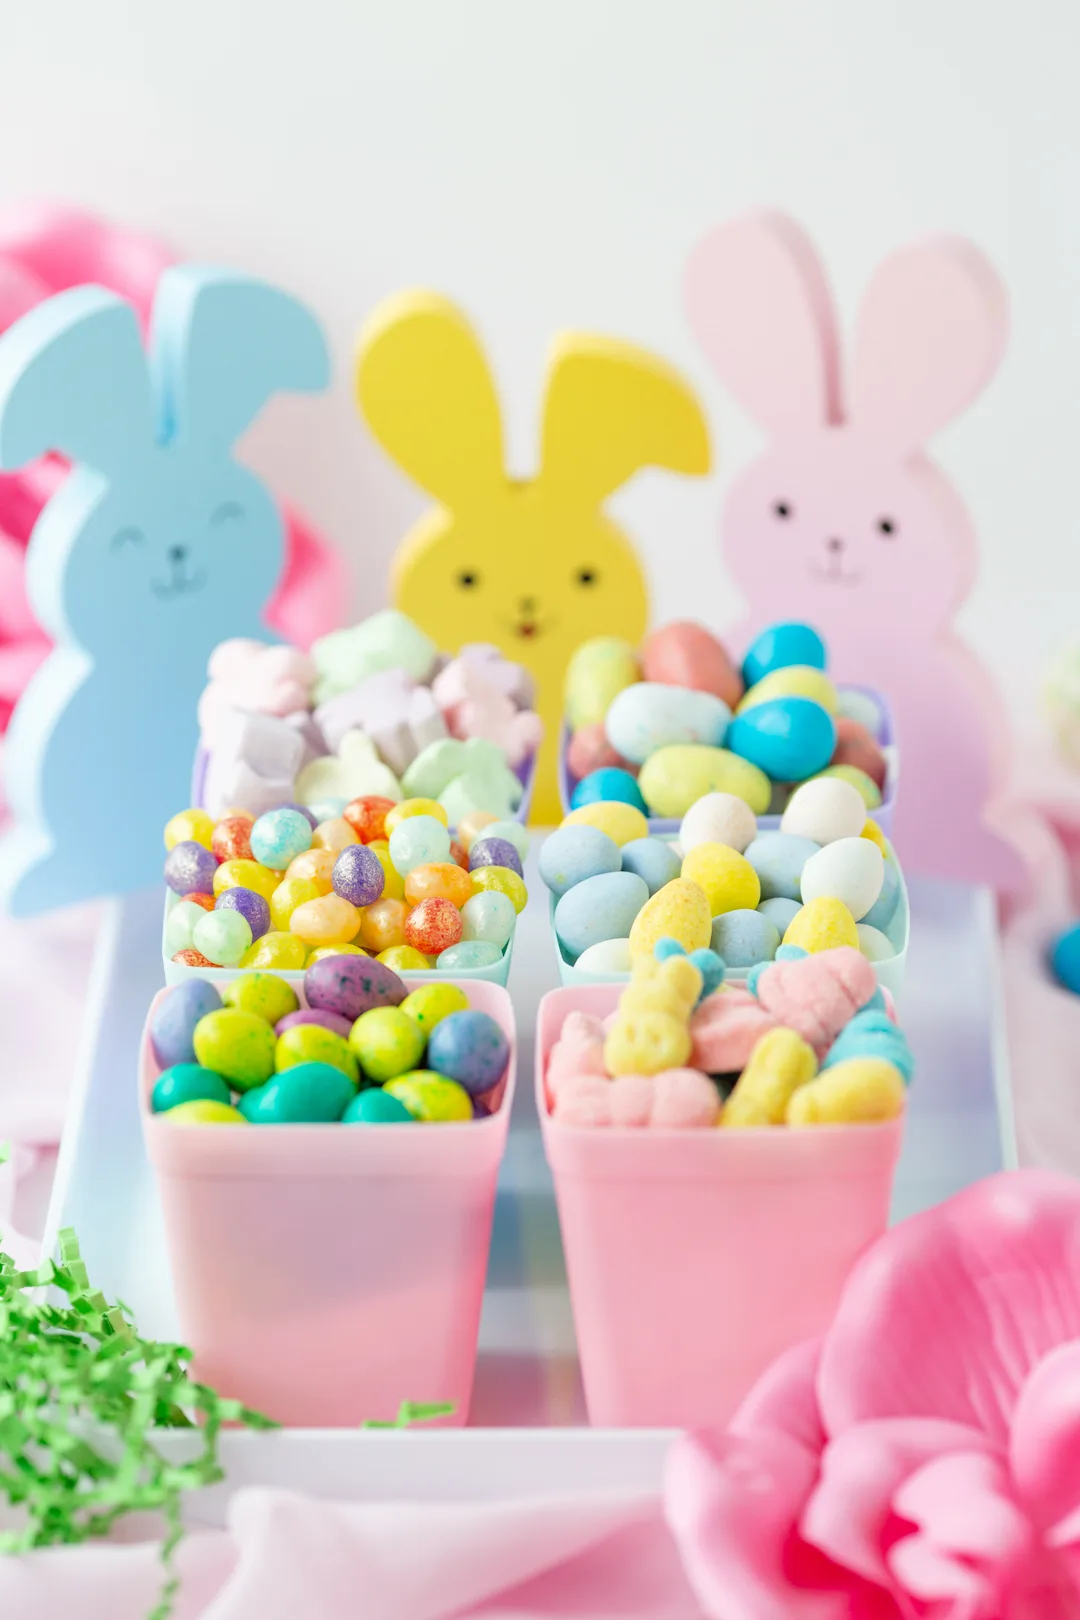 up close view of a sweet, candy garden for easter celebrations